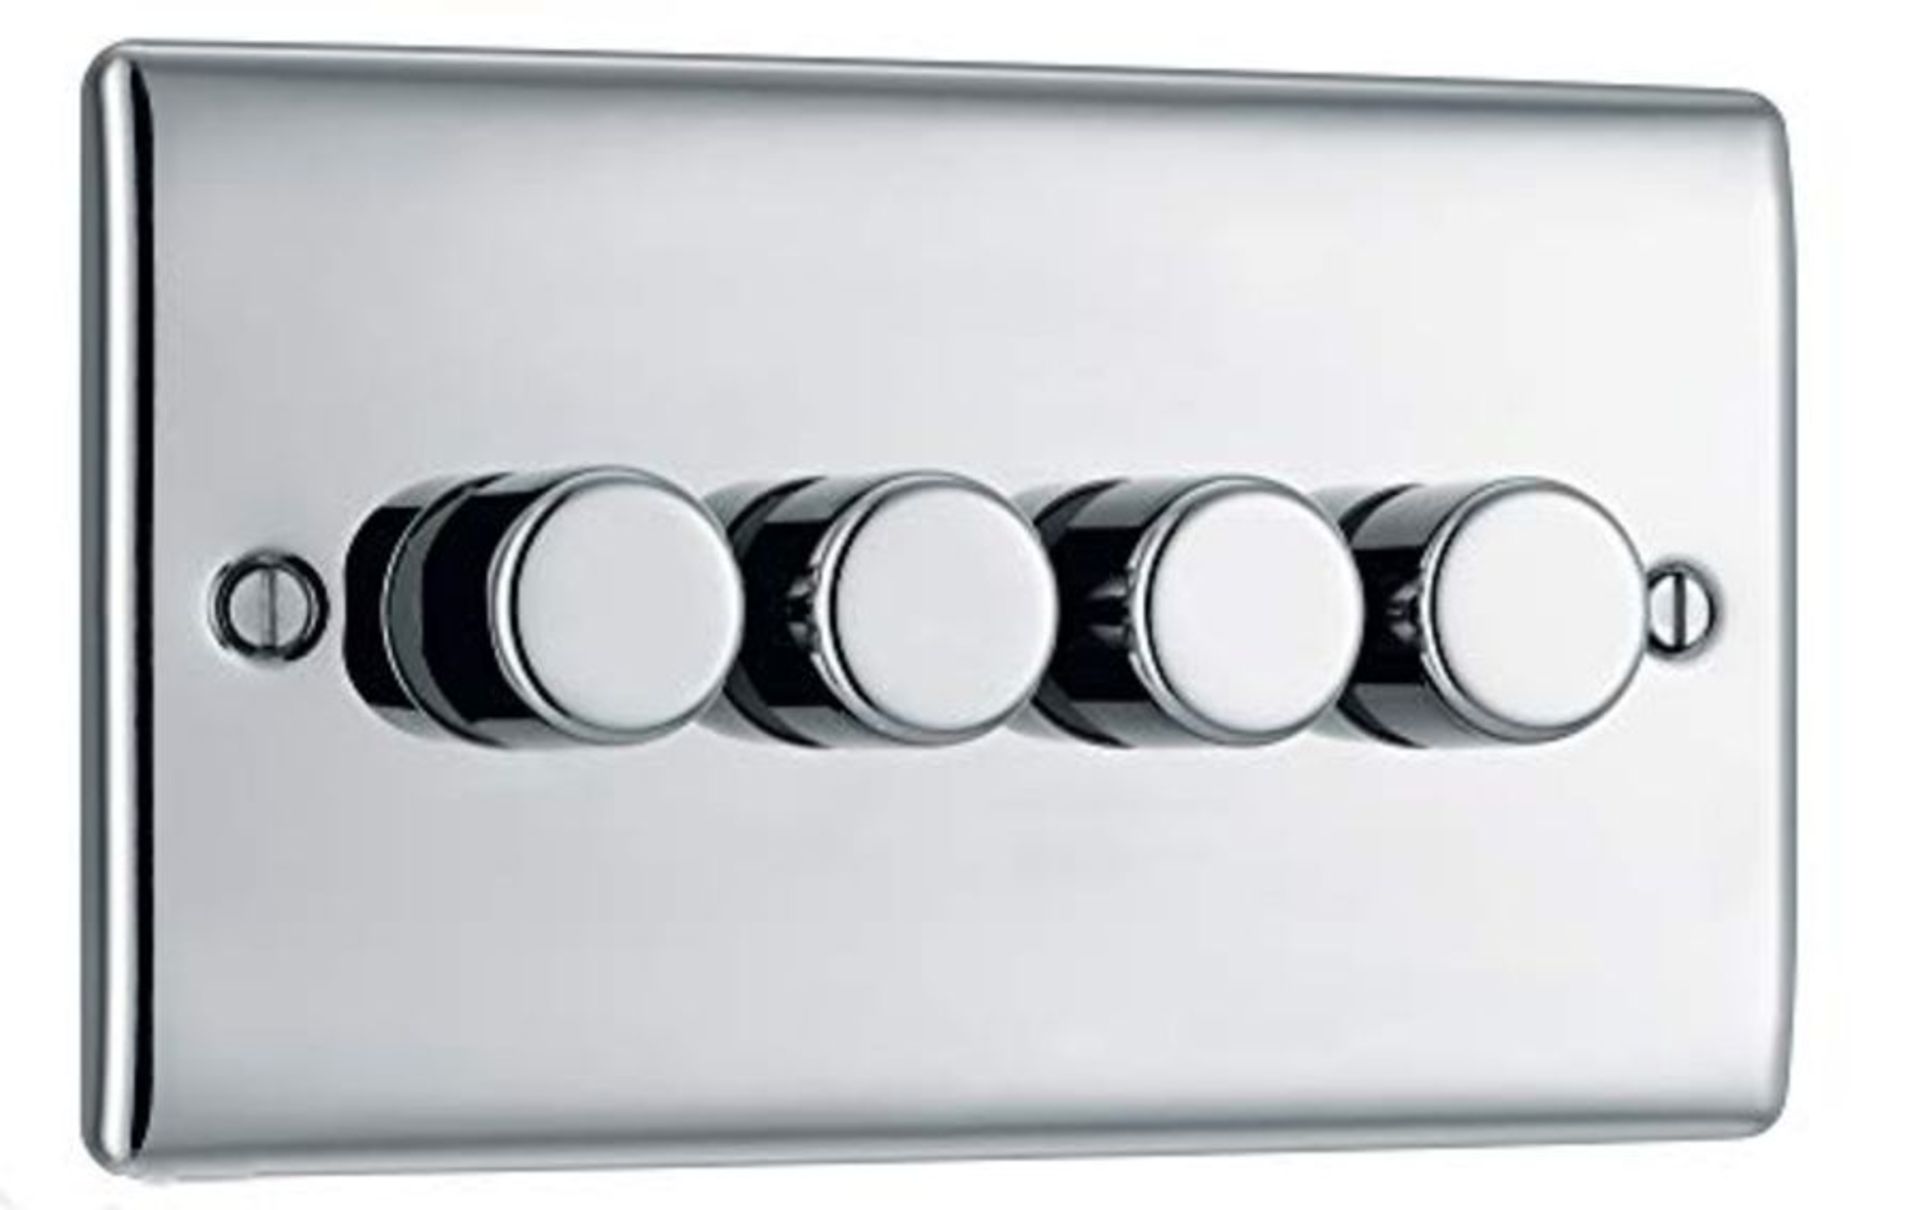 BG Electrical NBS84P-01 Quadruple Dimmer Light Switch, Brushed Steel, 2-Way, 400 Watts